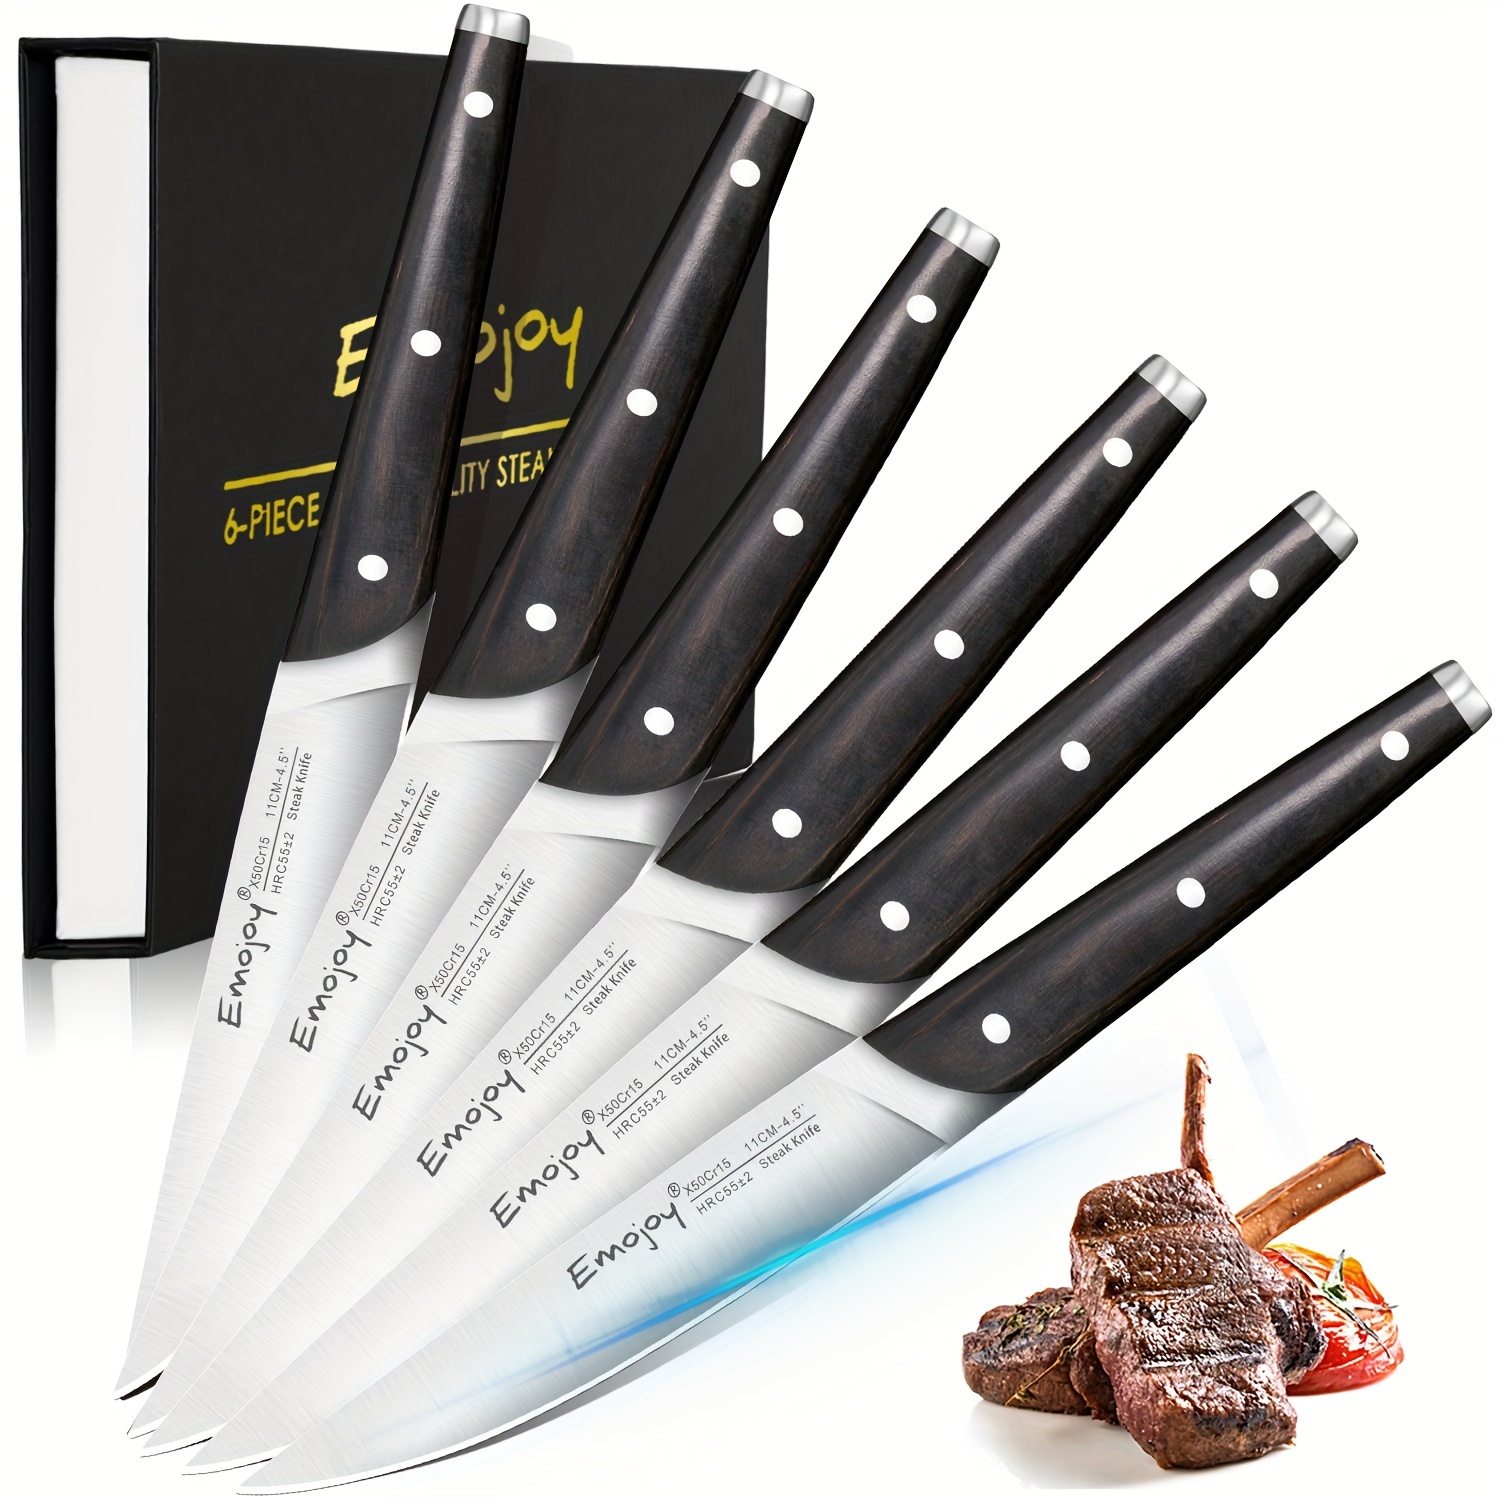 

6-piece Steak Knife Set, Emojoy Brand, High-quality German Stainless Steel, Fashionable Pakkawood Full Tang Handle, Triple Rivet Polymer Design, Durable And Sharp For Cutting & Slicing